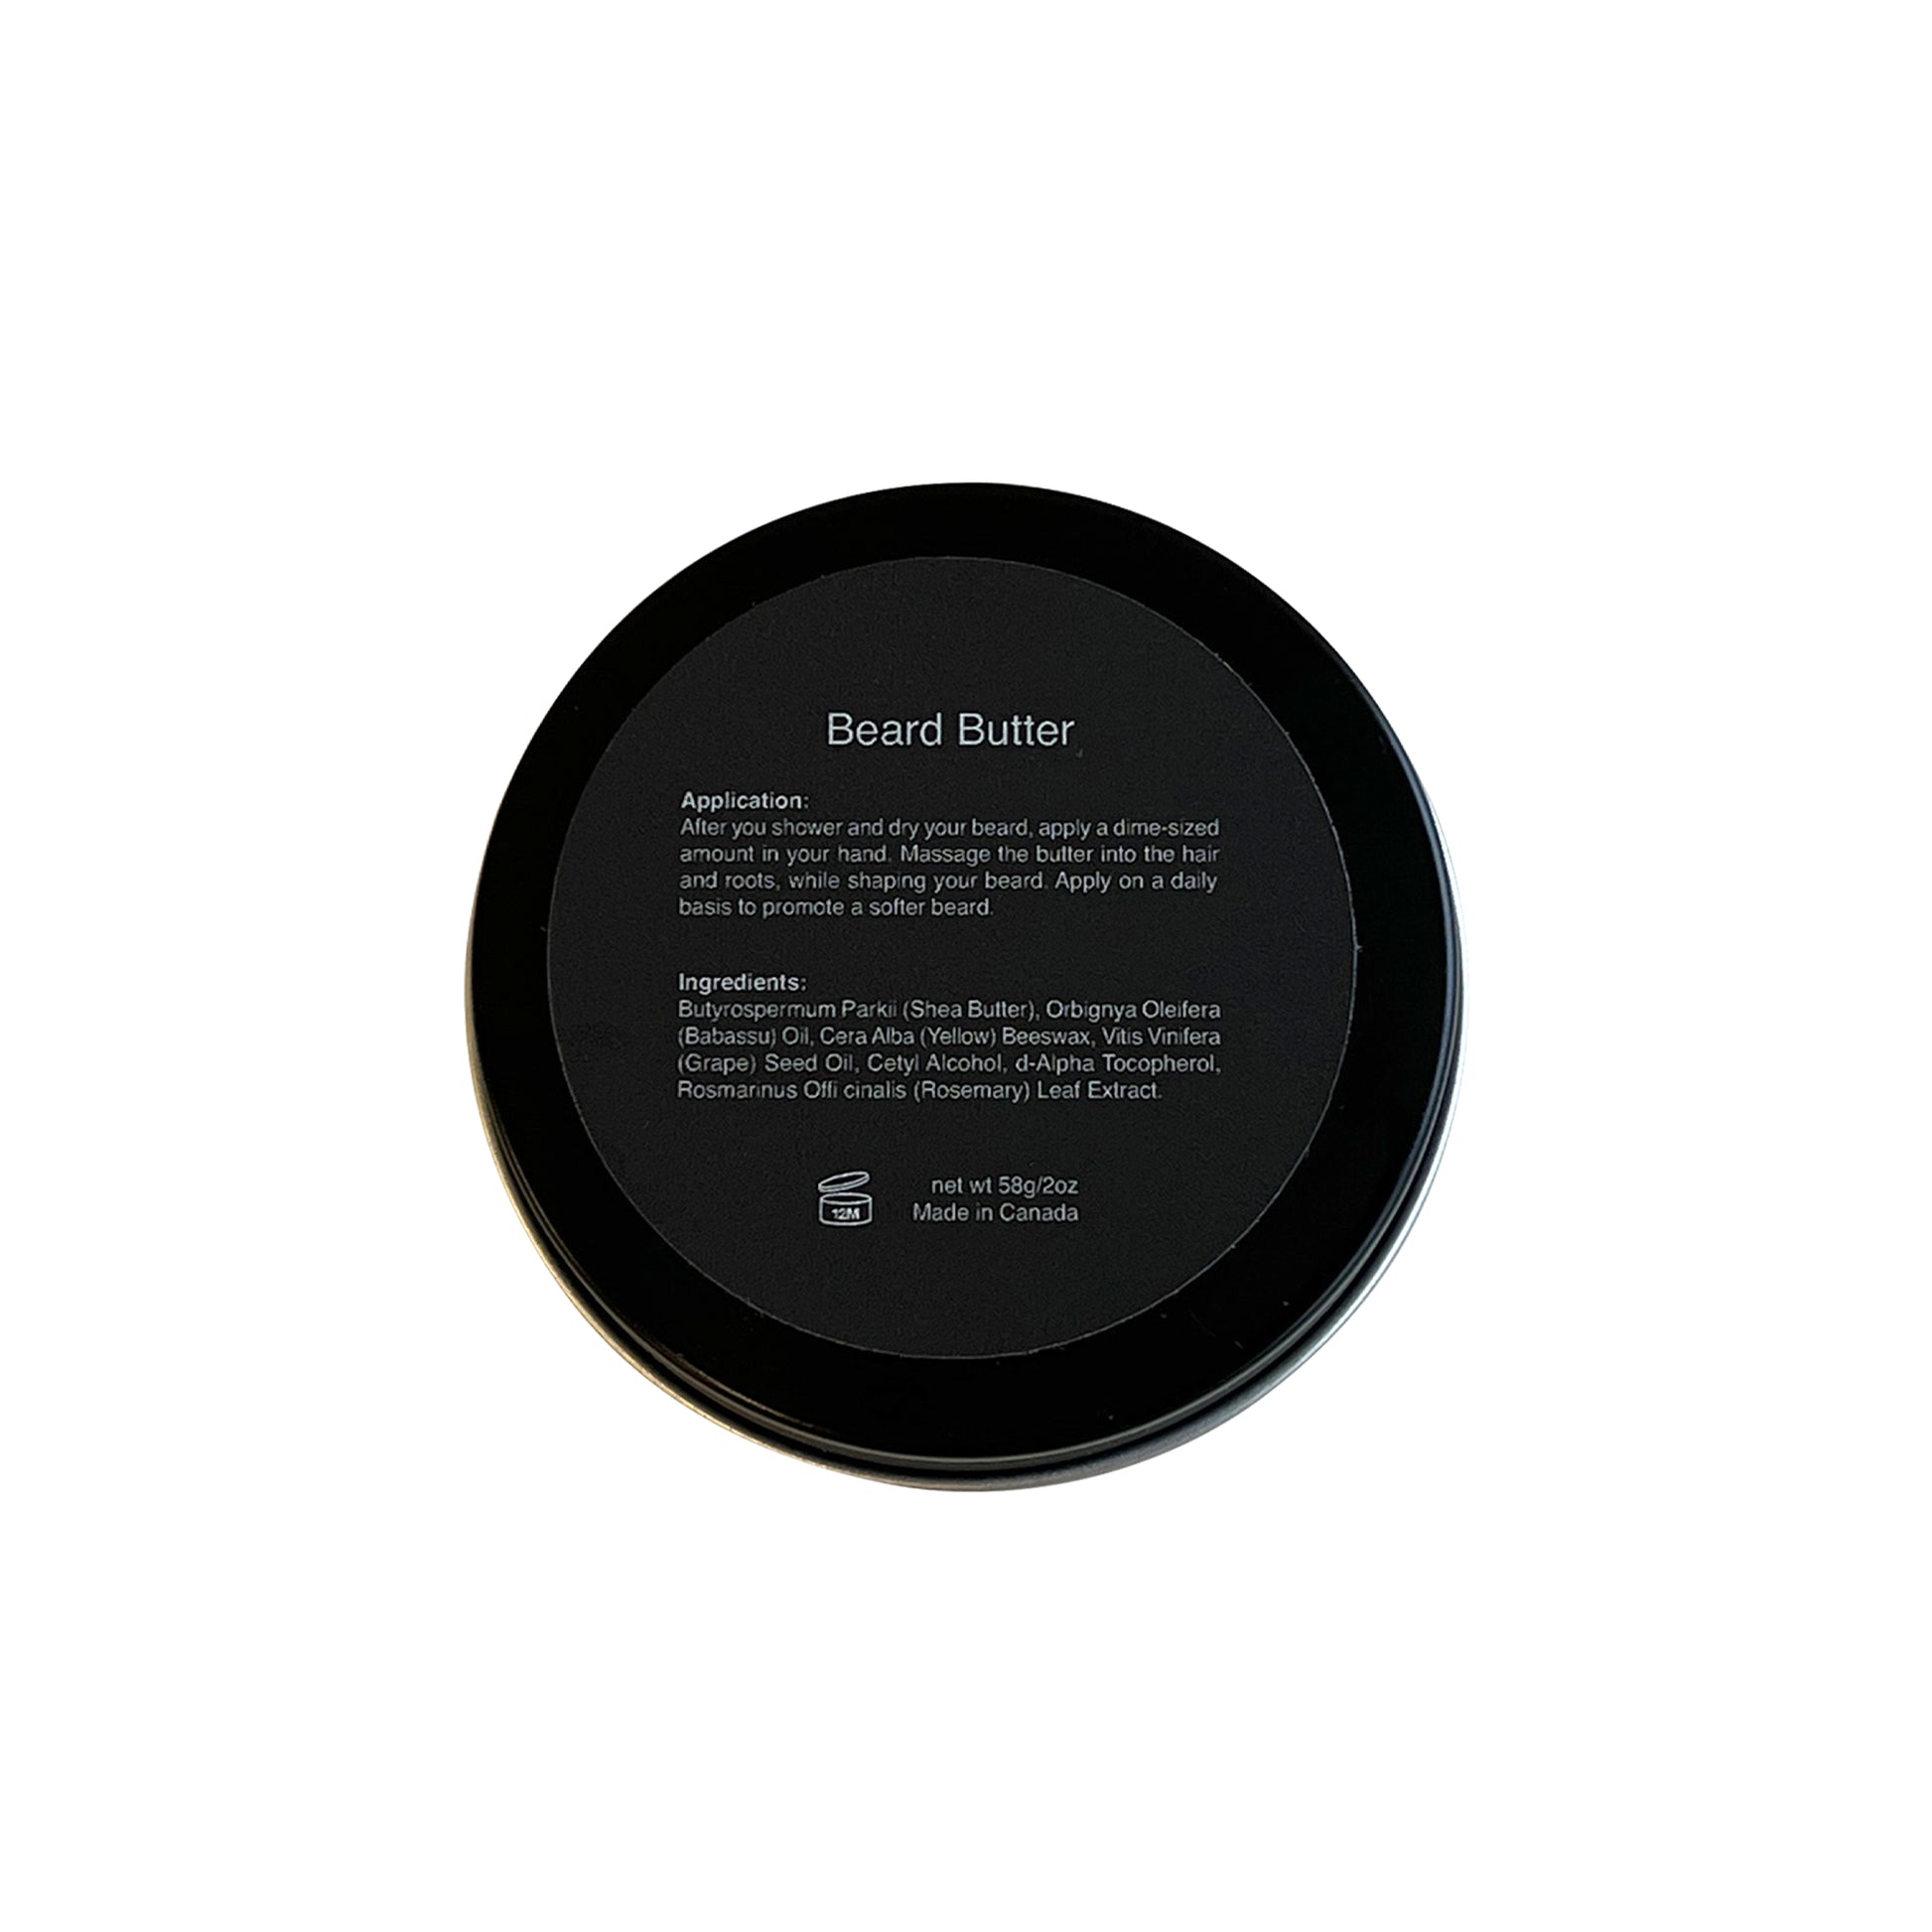 A black container with 'Beard Butter' label.